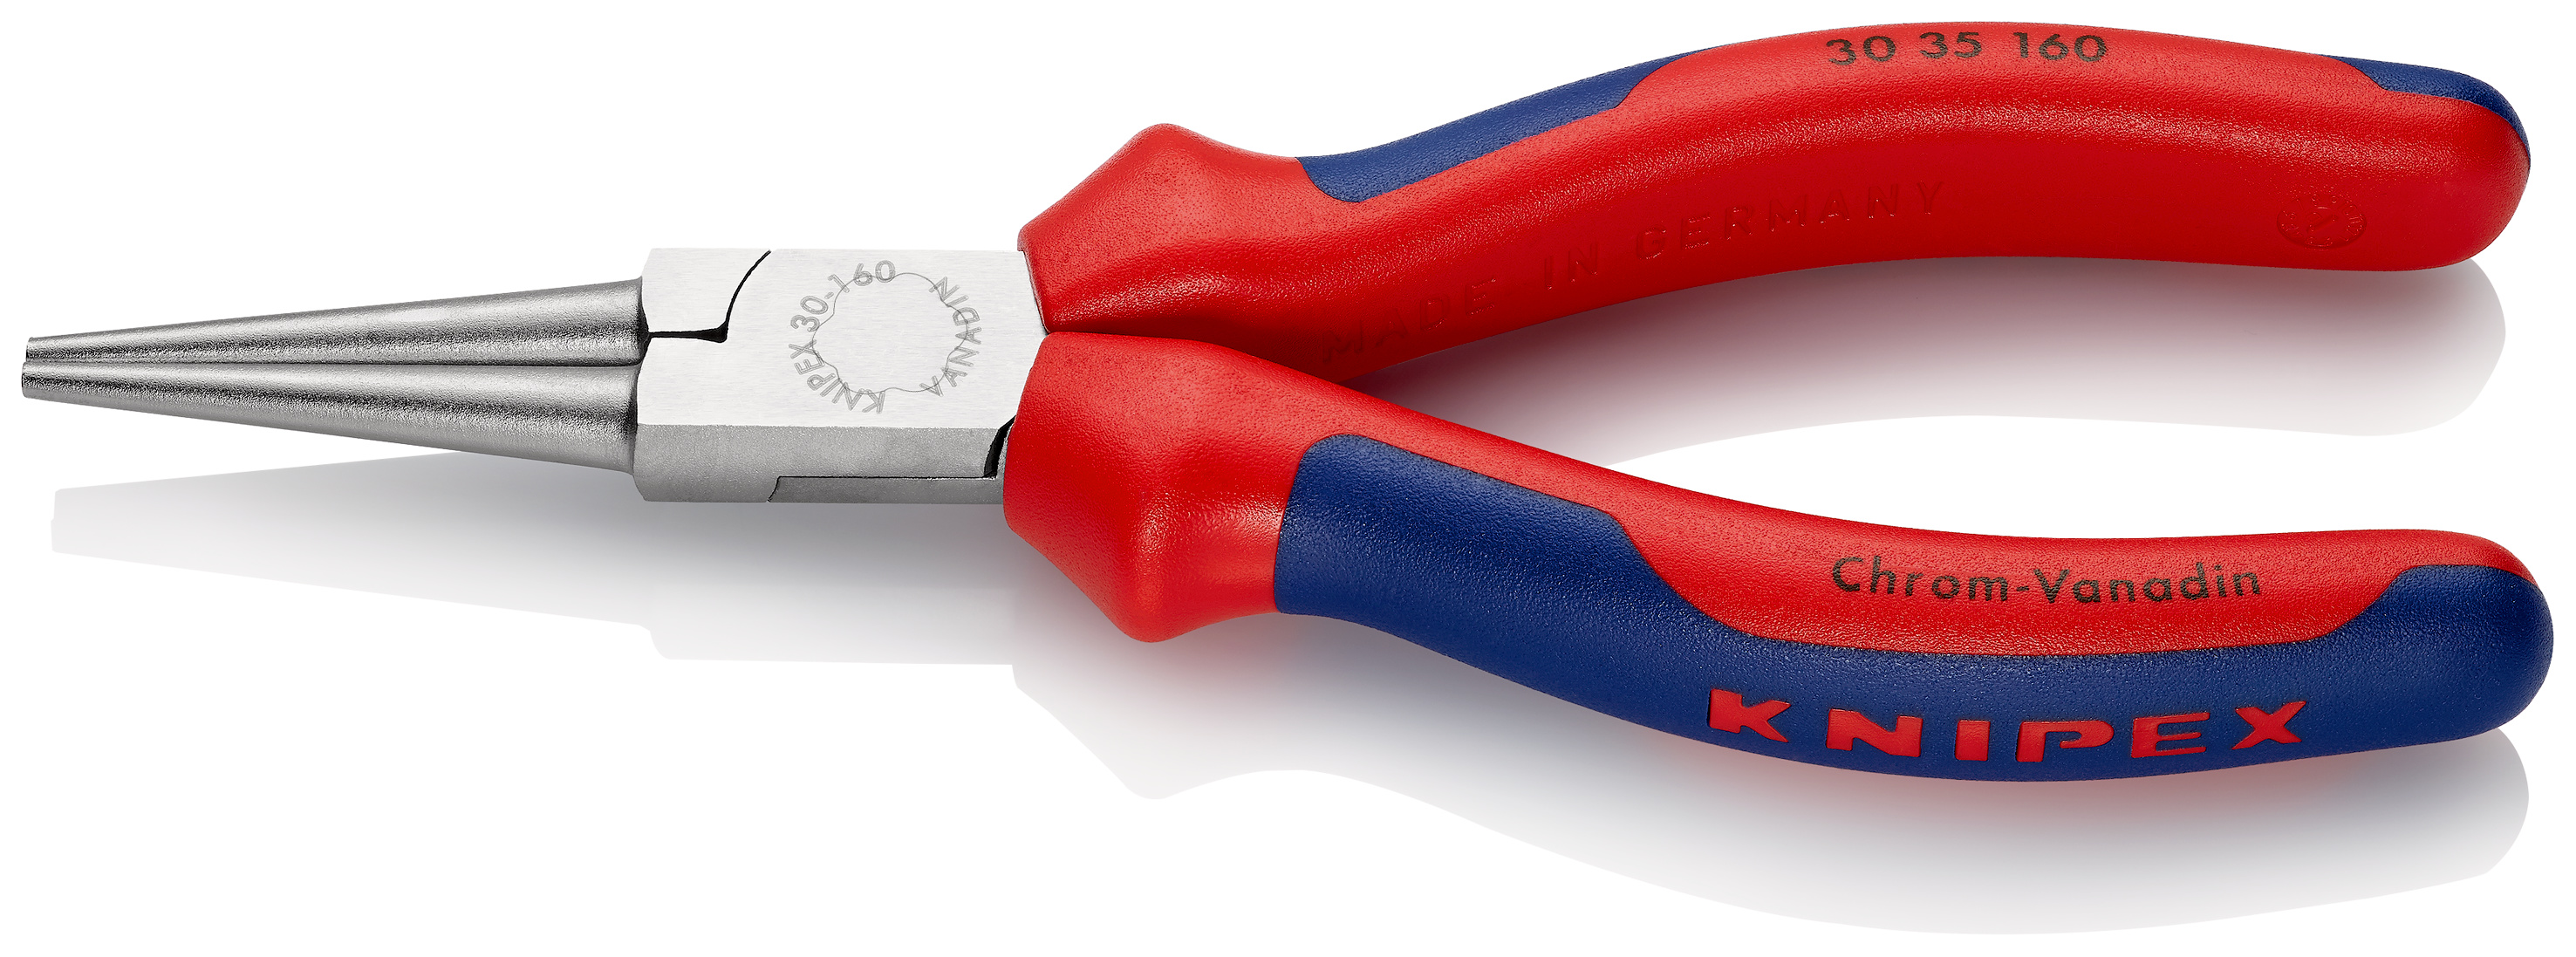 Long Nose Pliers | Knipex